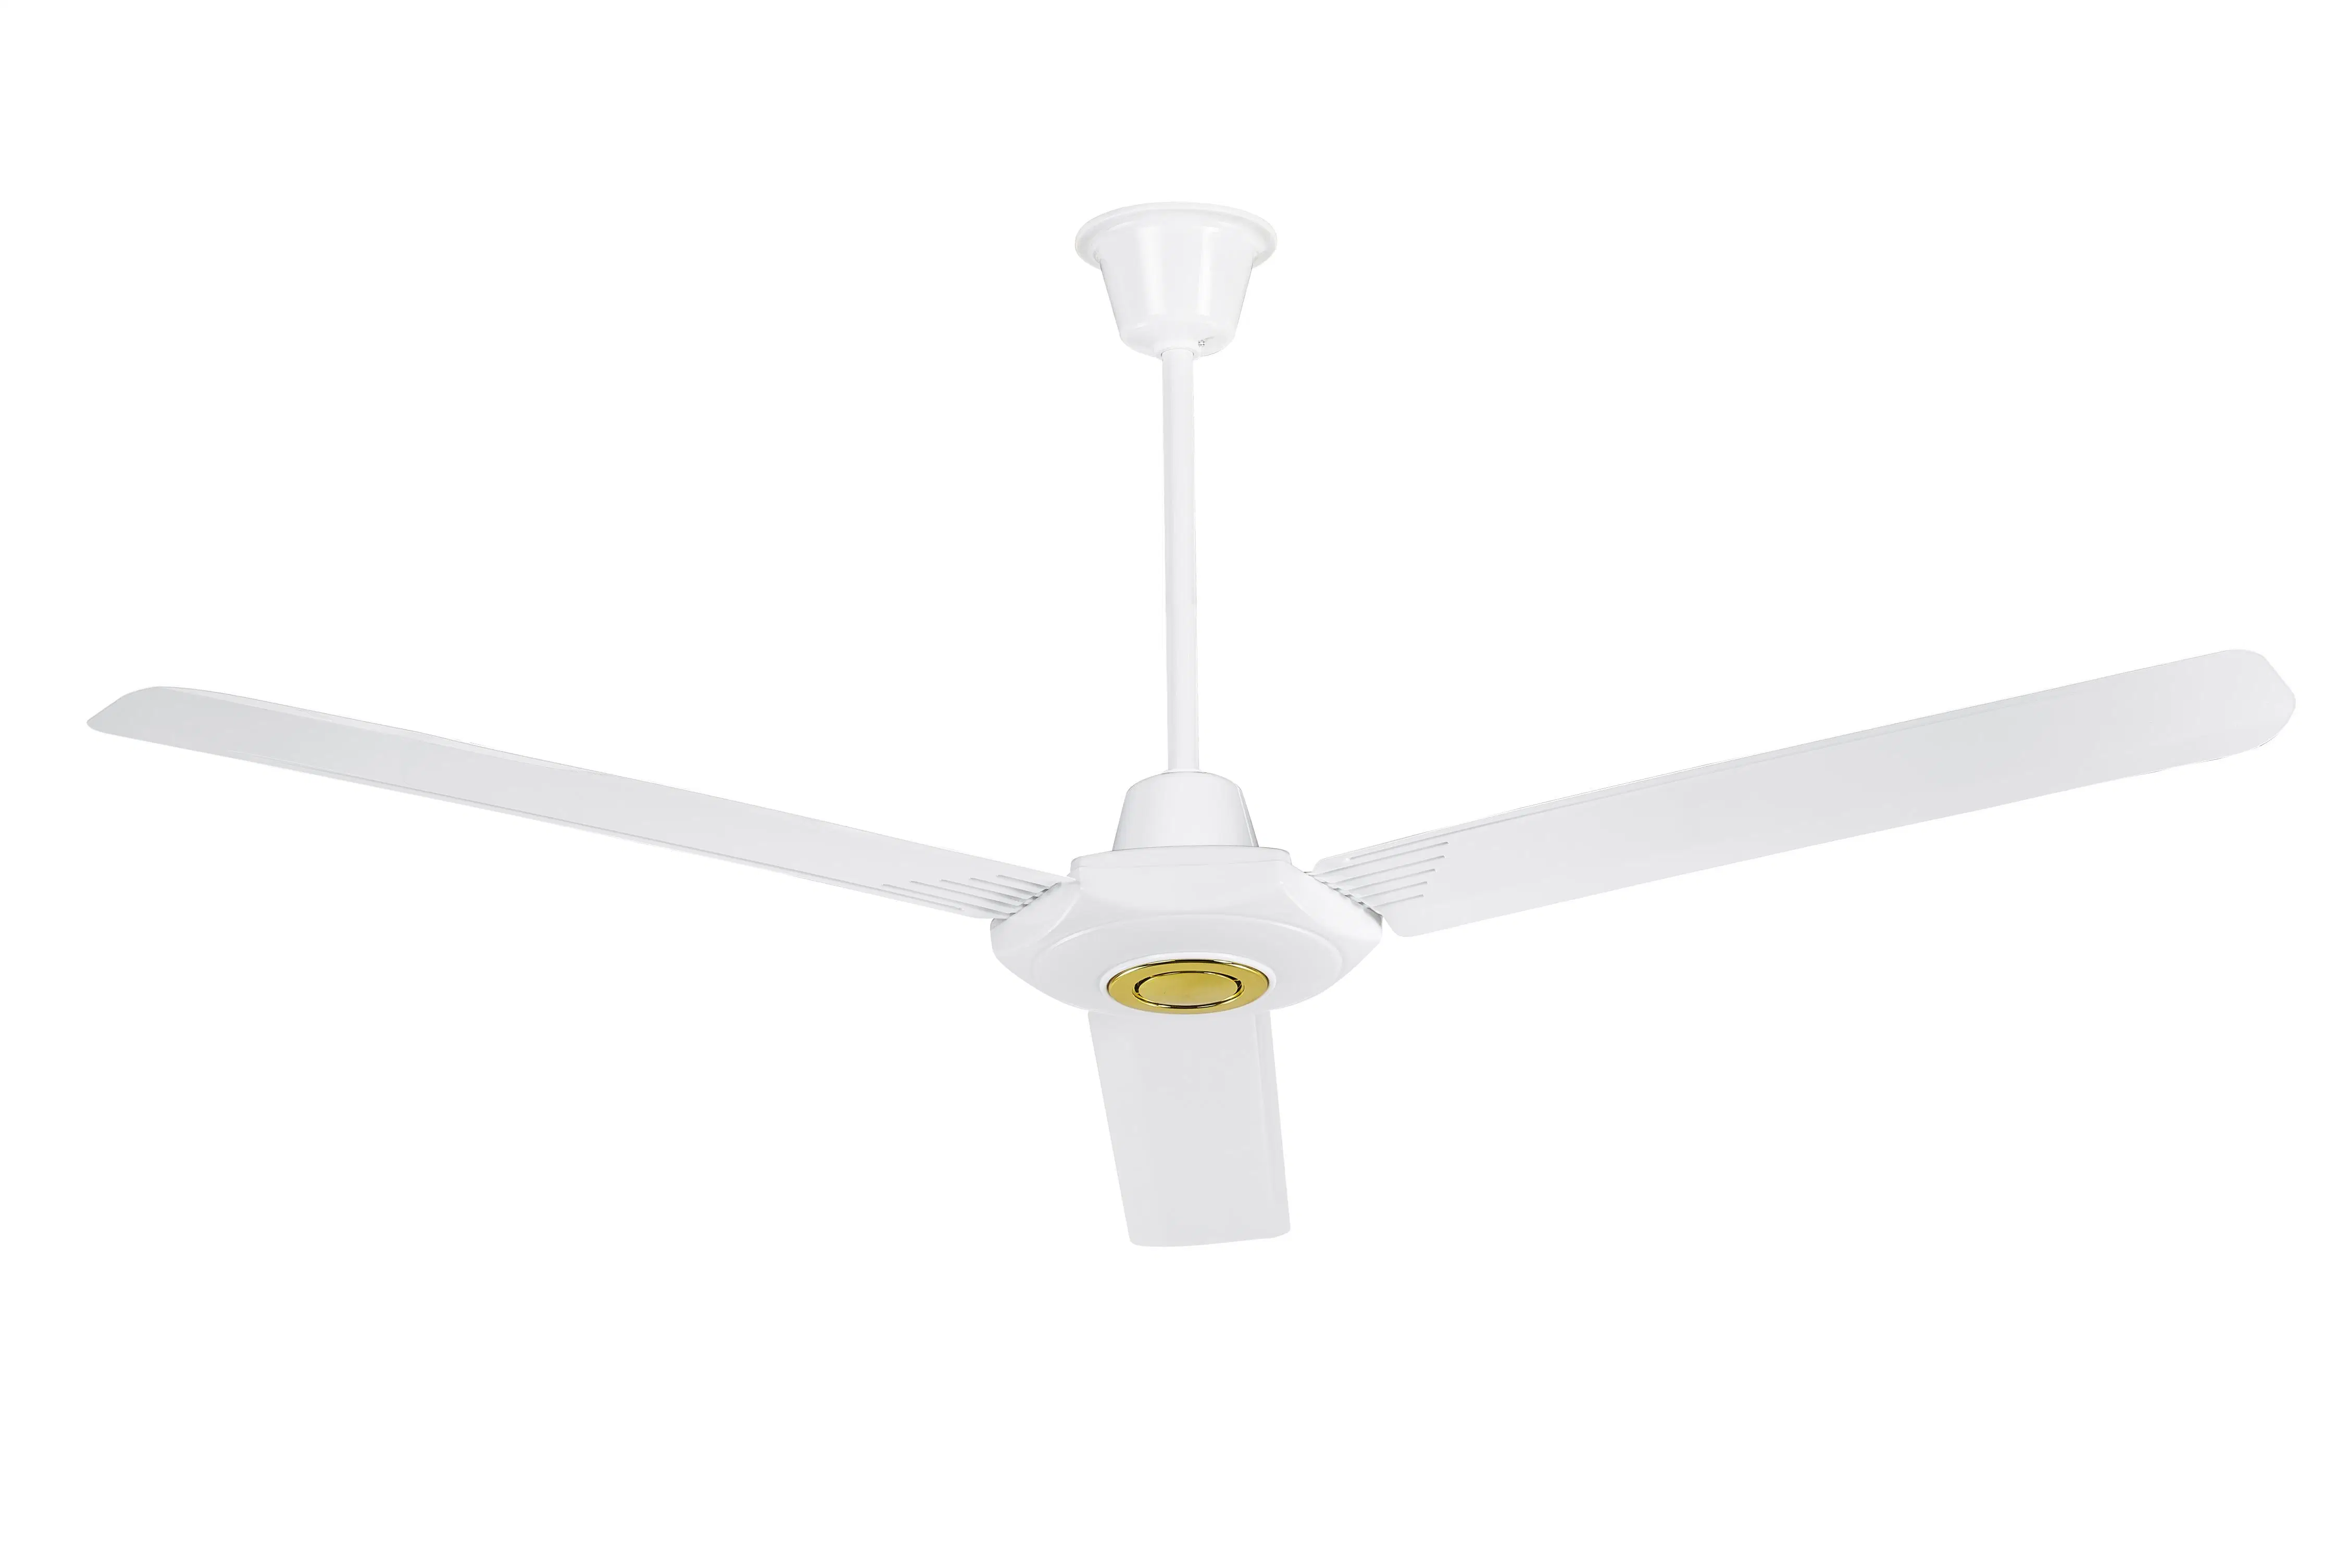 Acdc Solar 56 Inch Ceiling Installation Electric Industrial Ceiling Fan Electric Power Source Metal Blades Ventilation Air Cooling Fan